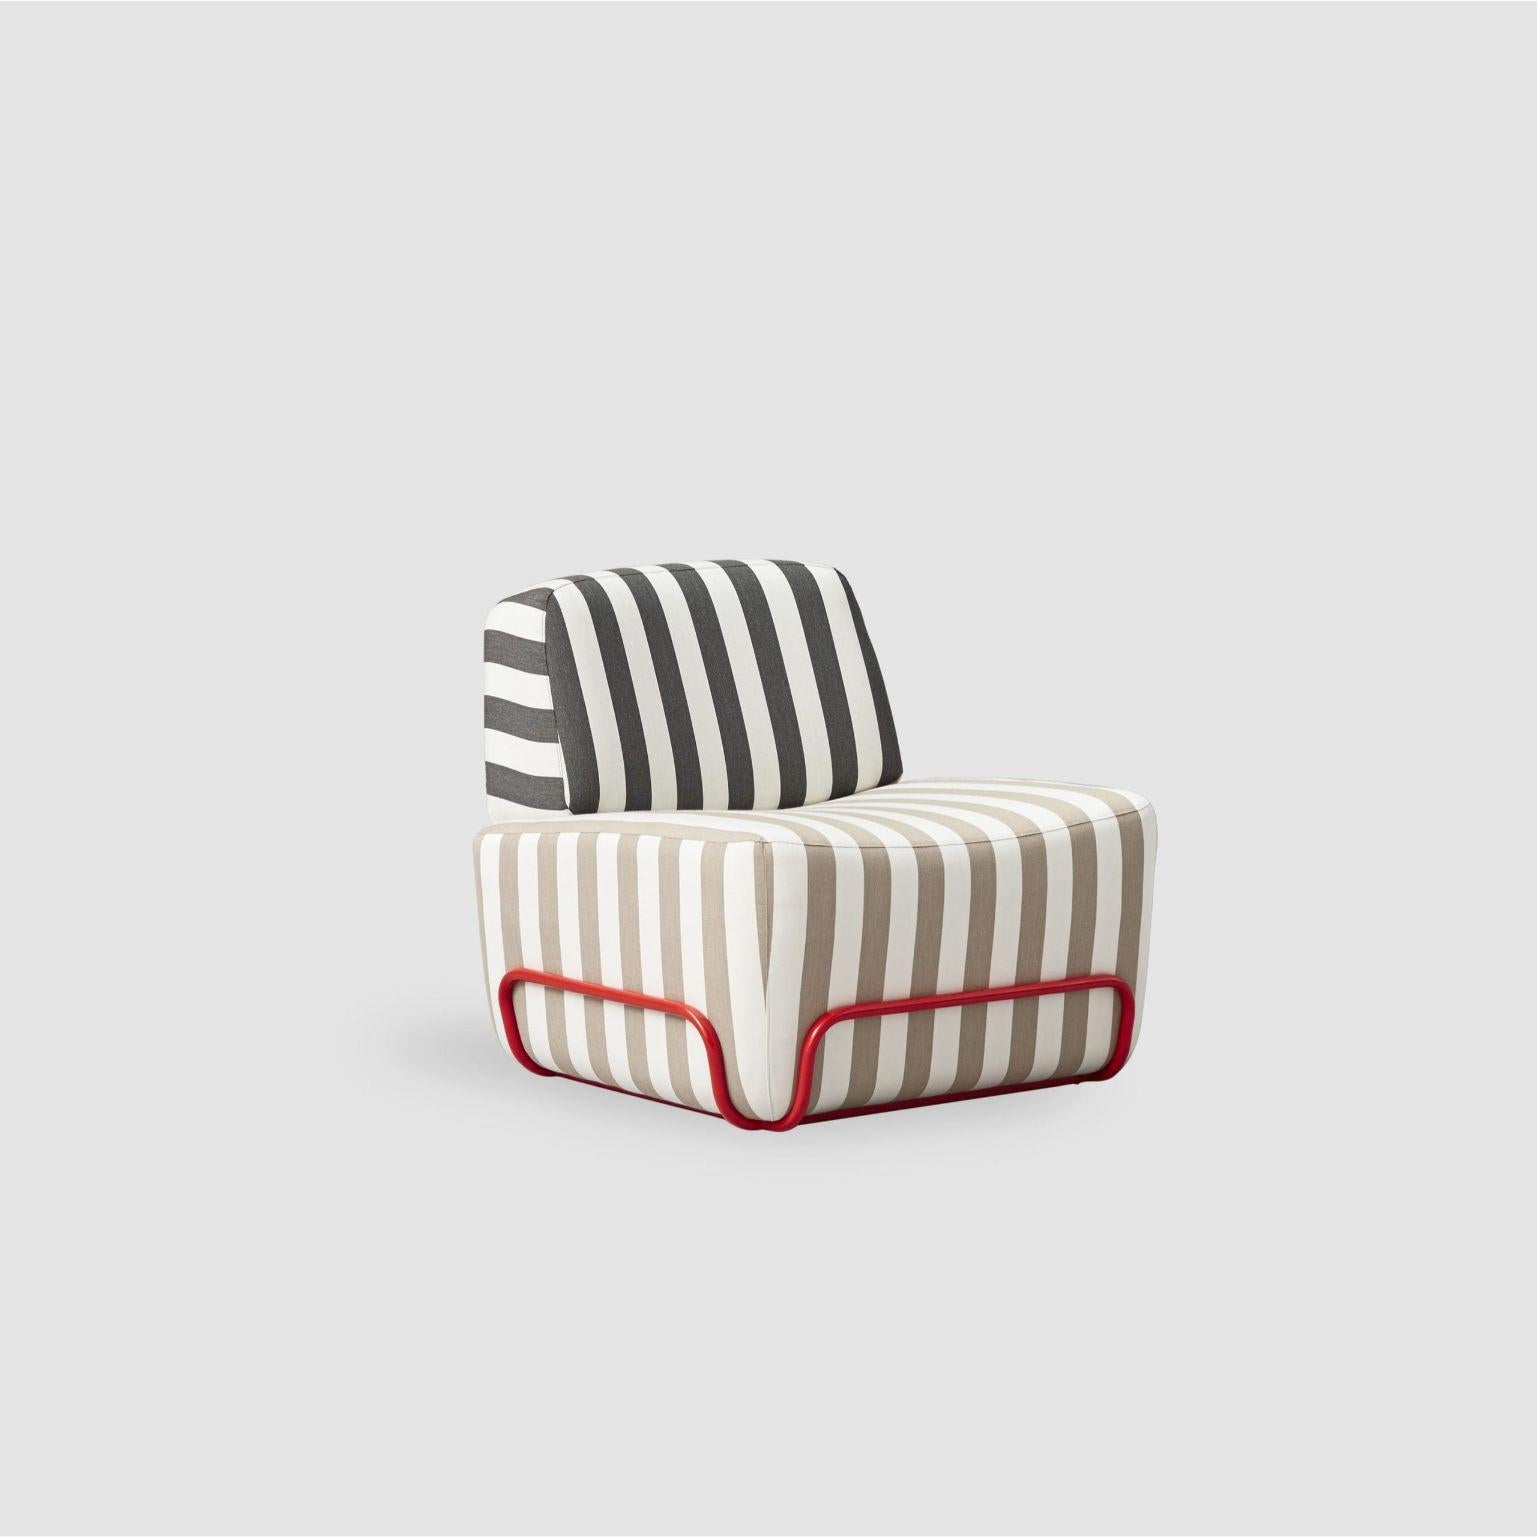 Pigro armchair by Studio Pastina
Dimensions: W83, D90, H77, Seat 42
Materials: Pine wood structure, tablex and particles board
Foam CMHR (high resilience and flame retardant) for all our cushion filling systems
Painted iron structure